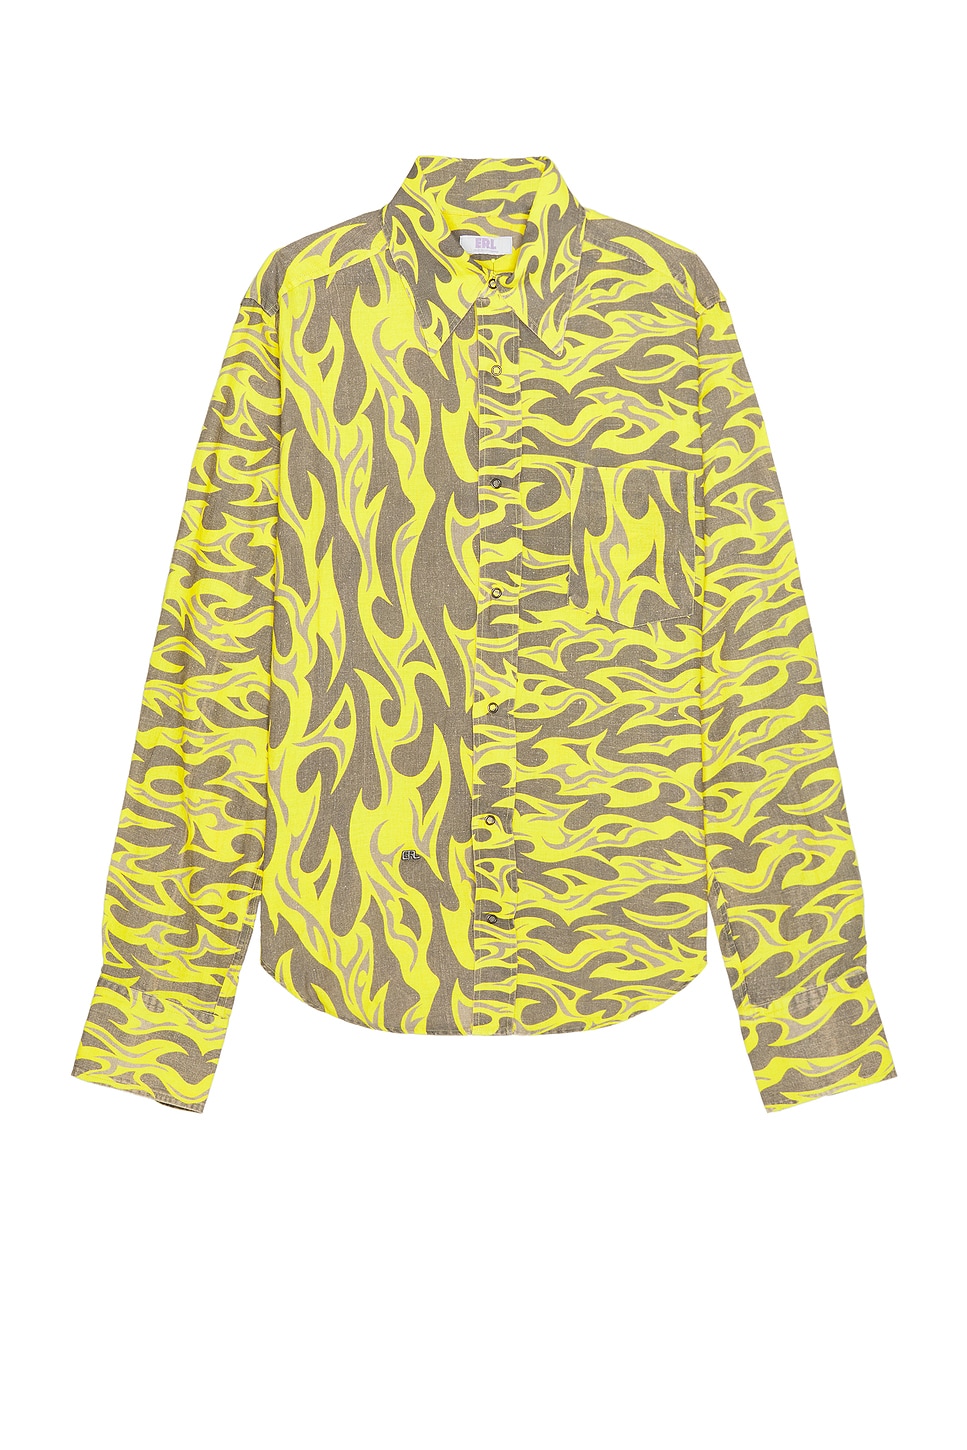 Image 1 of ERL Unisex Printed Button Up Shirt Woven in Yellow Flames